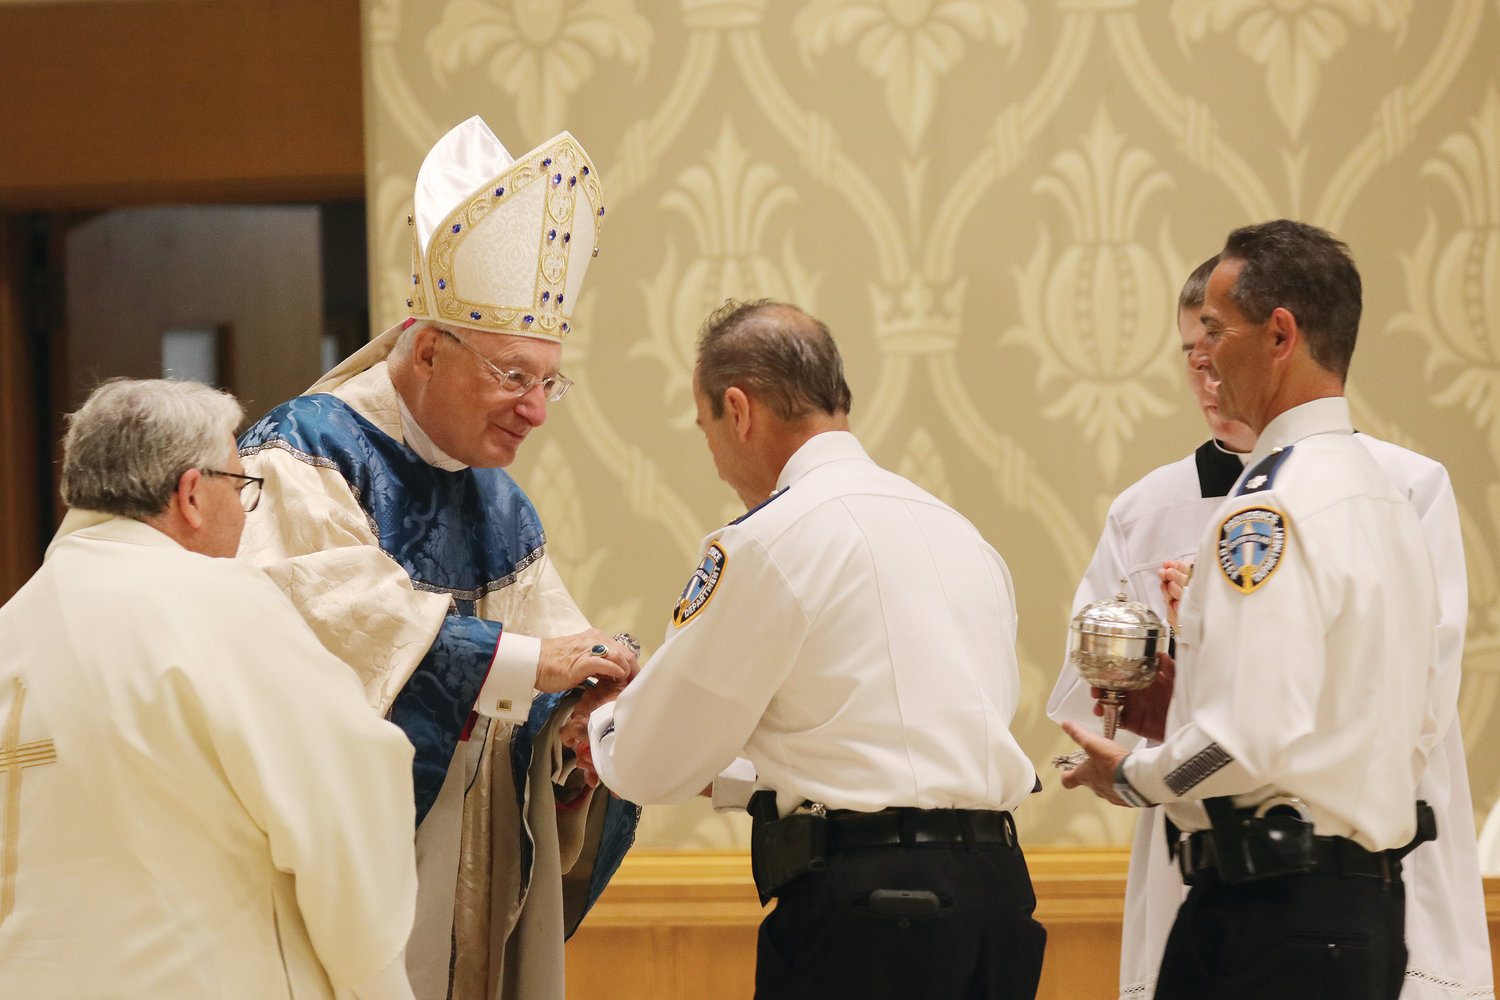 Chief Hugh Clements Jr., left, and Deputy Chief Thomas Verdi present the gifts to Bishop Robert C. Evans during the annual Mass for Public Safety.